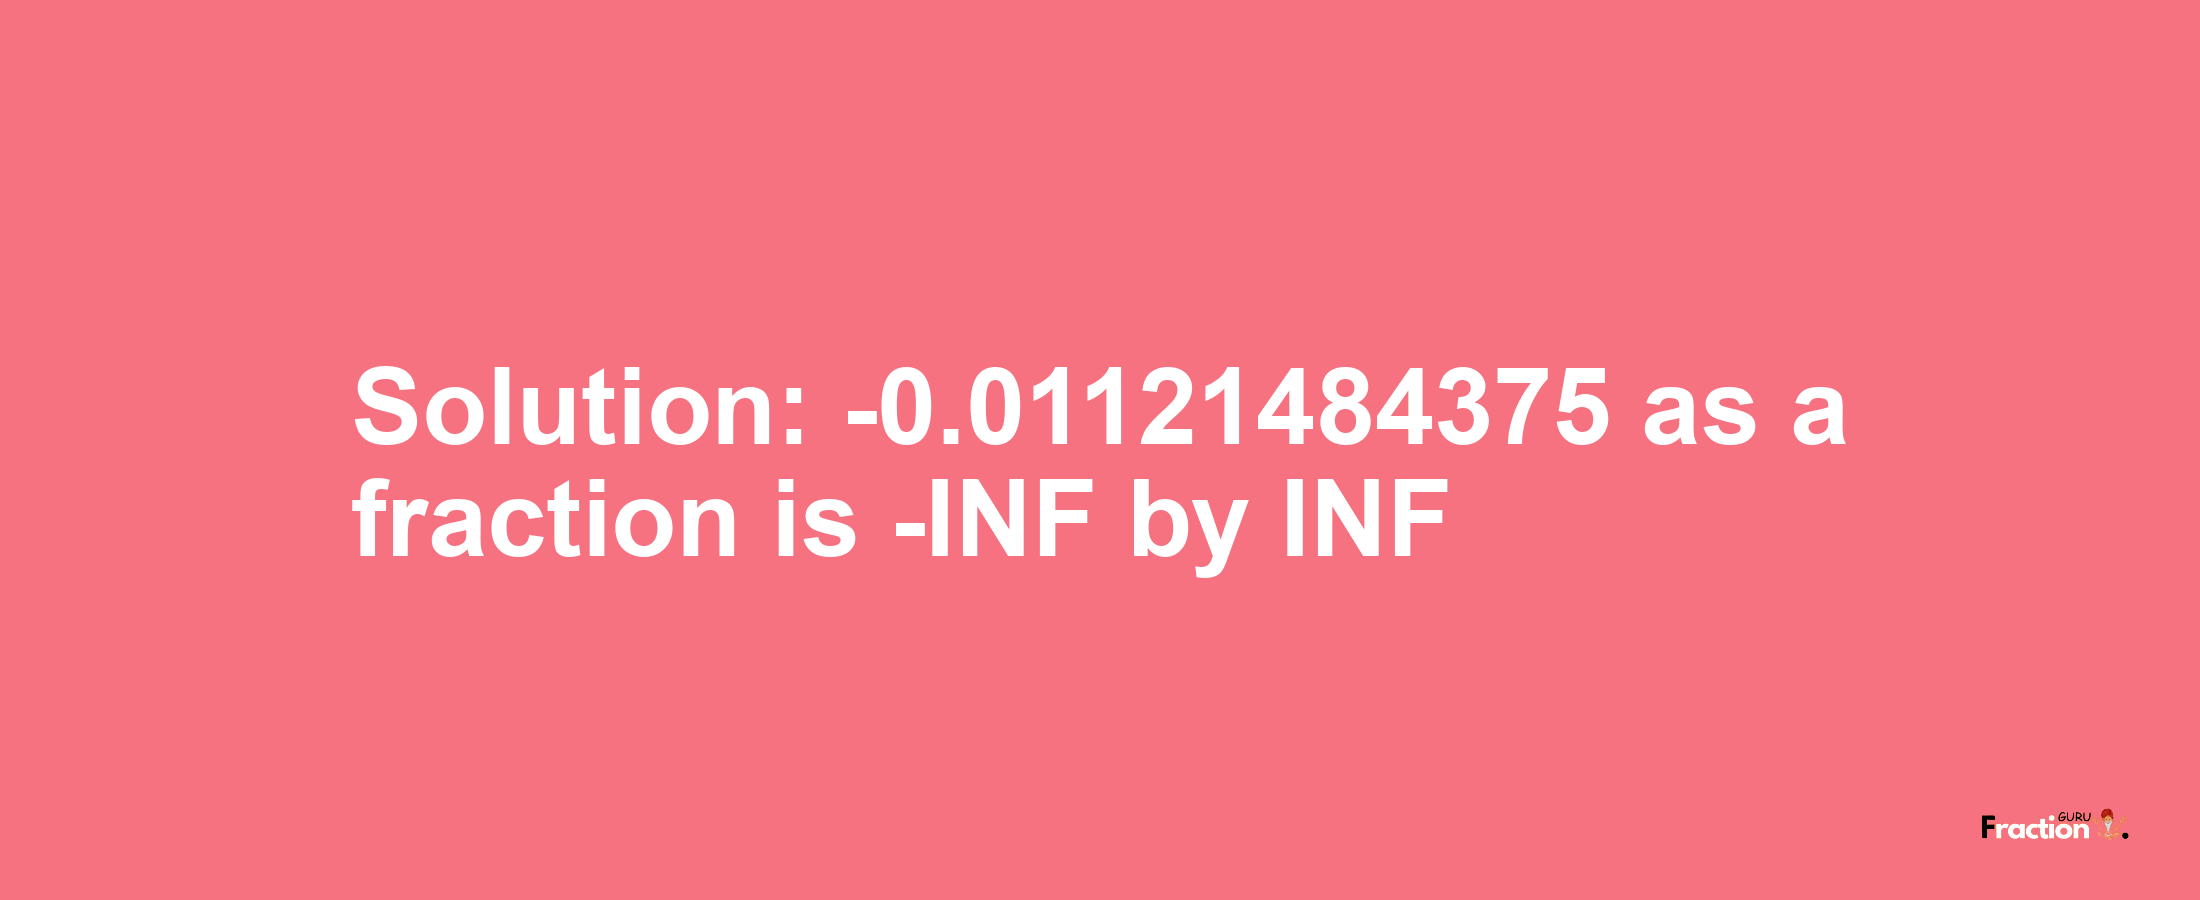 Solution:-0.01121484375 as a fraction is -INF/INF